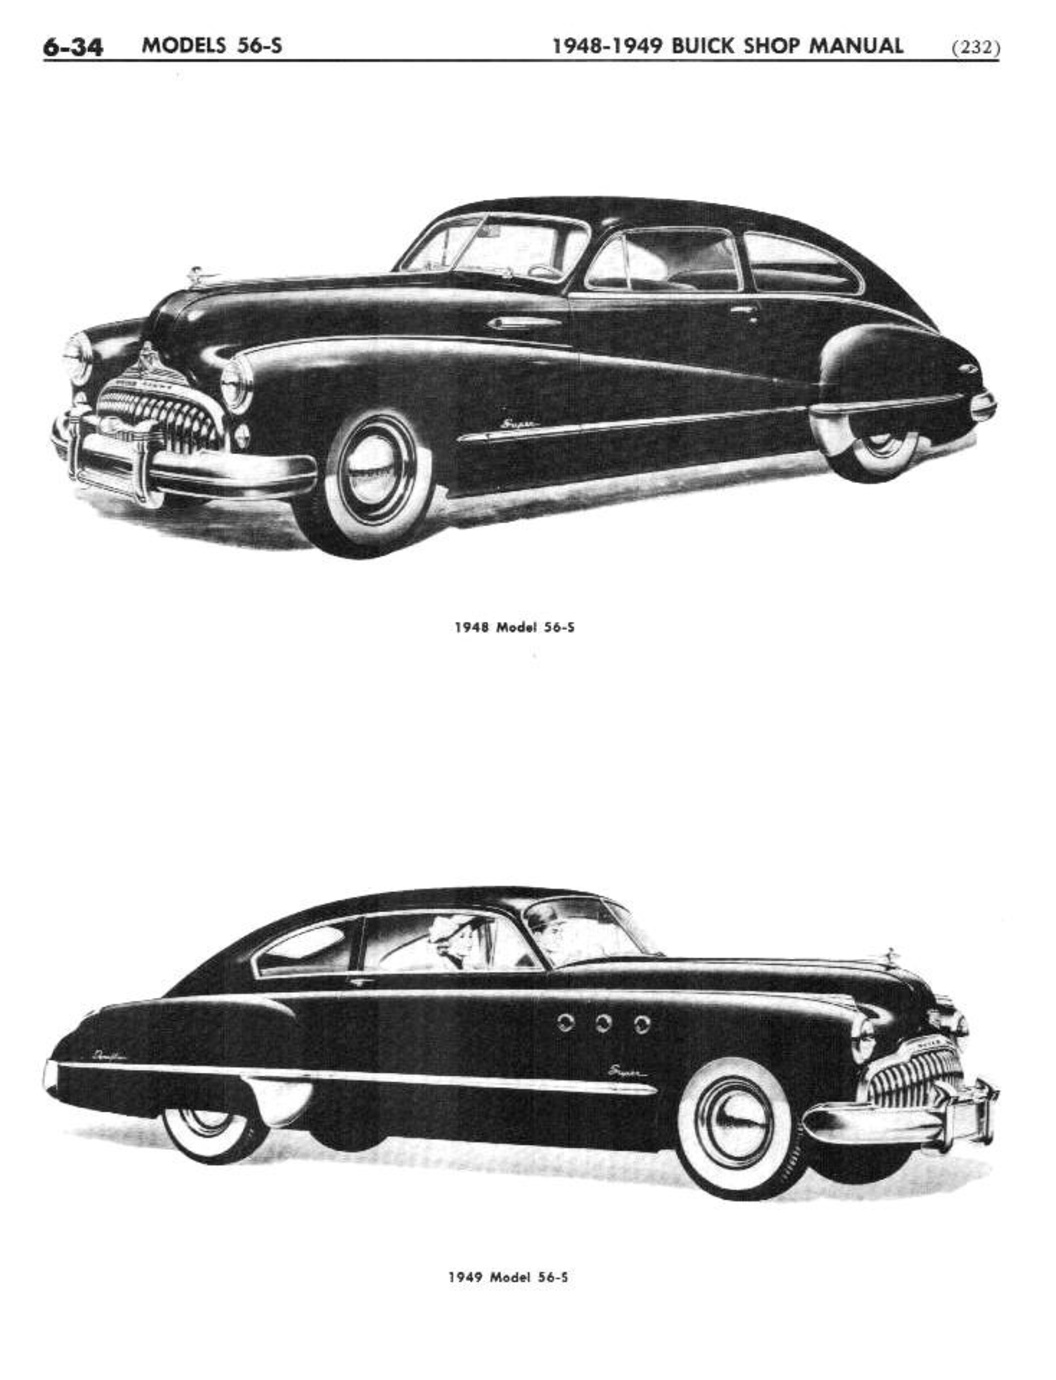 n_07 1948 Buick Shop Manual - Chassis Suspension-034-034.jpg